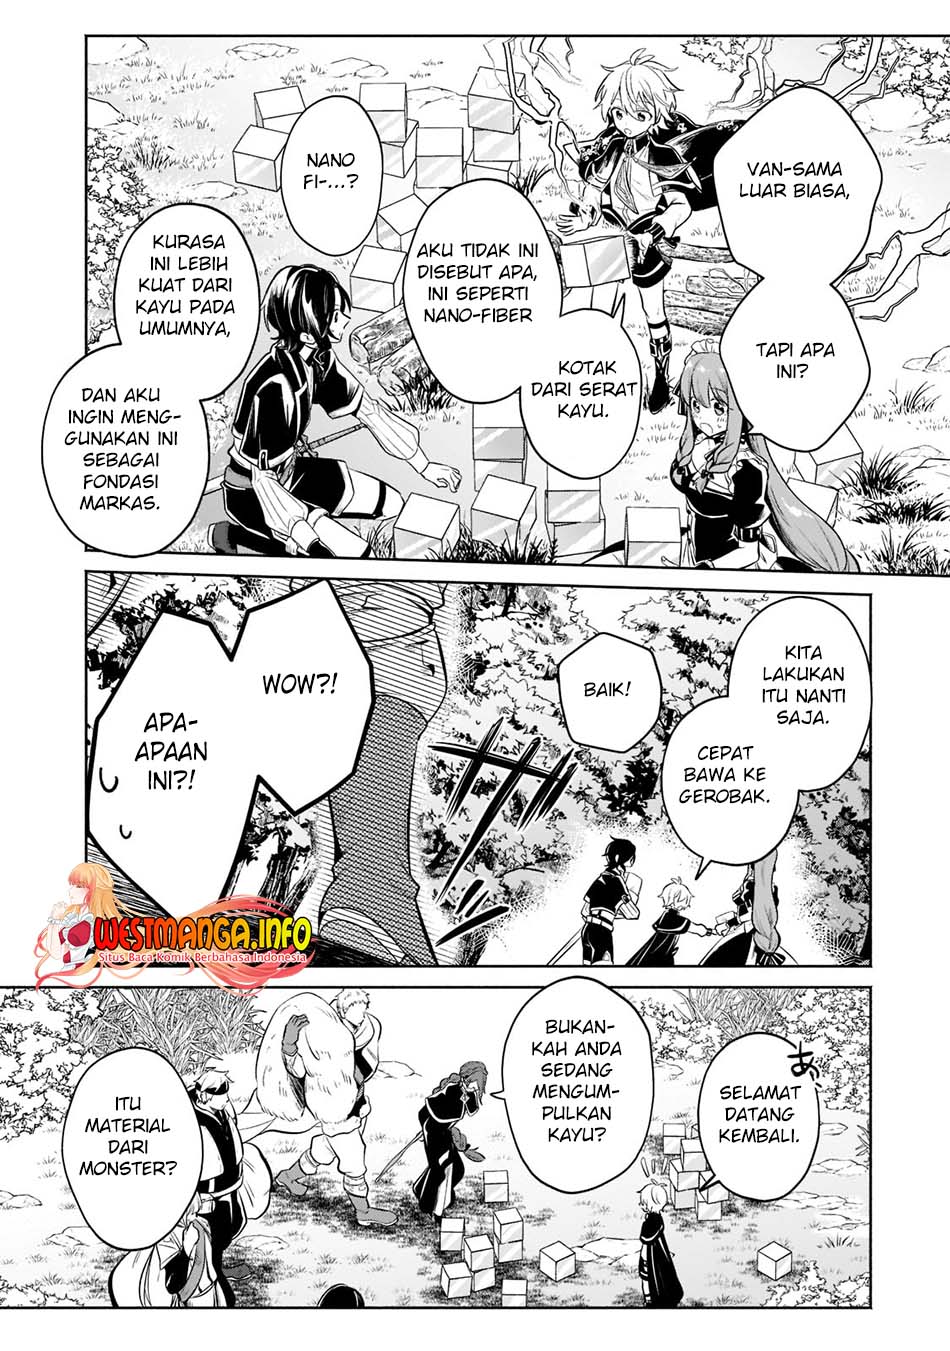 Fun Territory Defense Of The Easy-Going Lord ~The Nameless Village Is Made Into The Strongest Fortified City By Production Magic~ Chapter 08 - 193